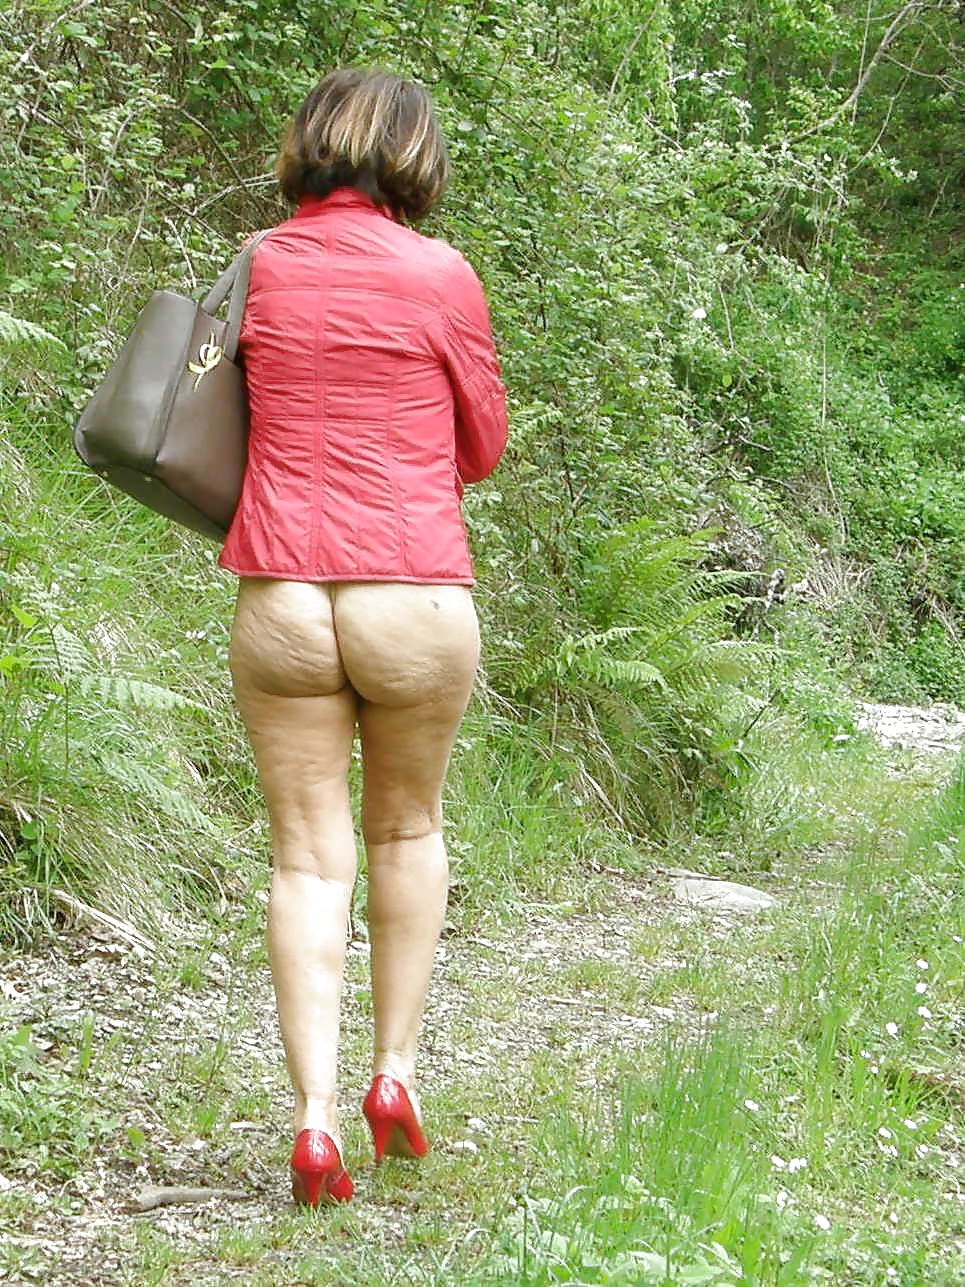 Nice granny nude in forest #32594463